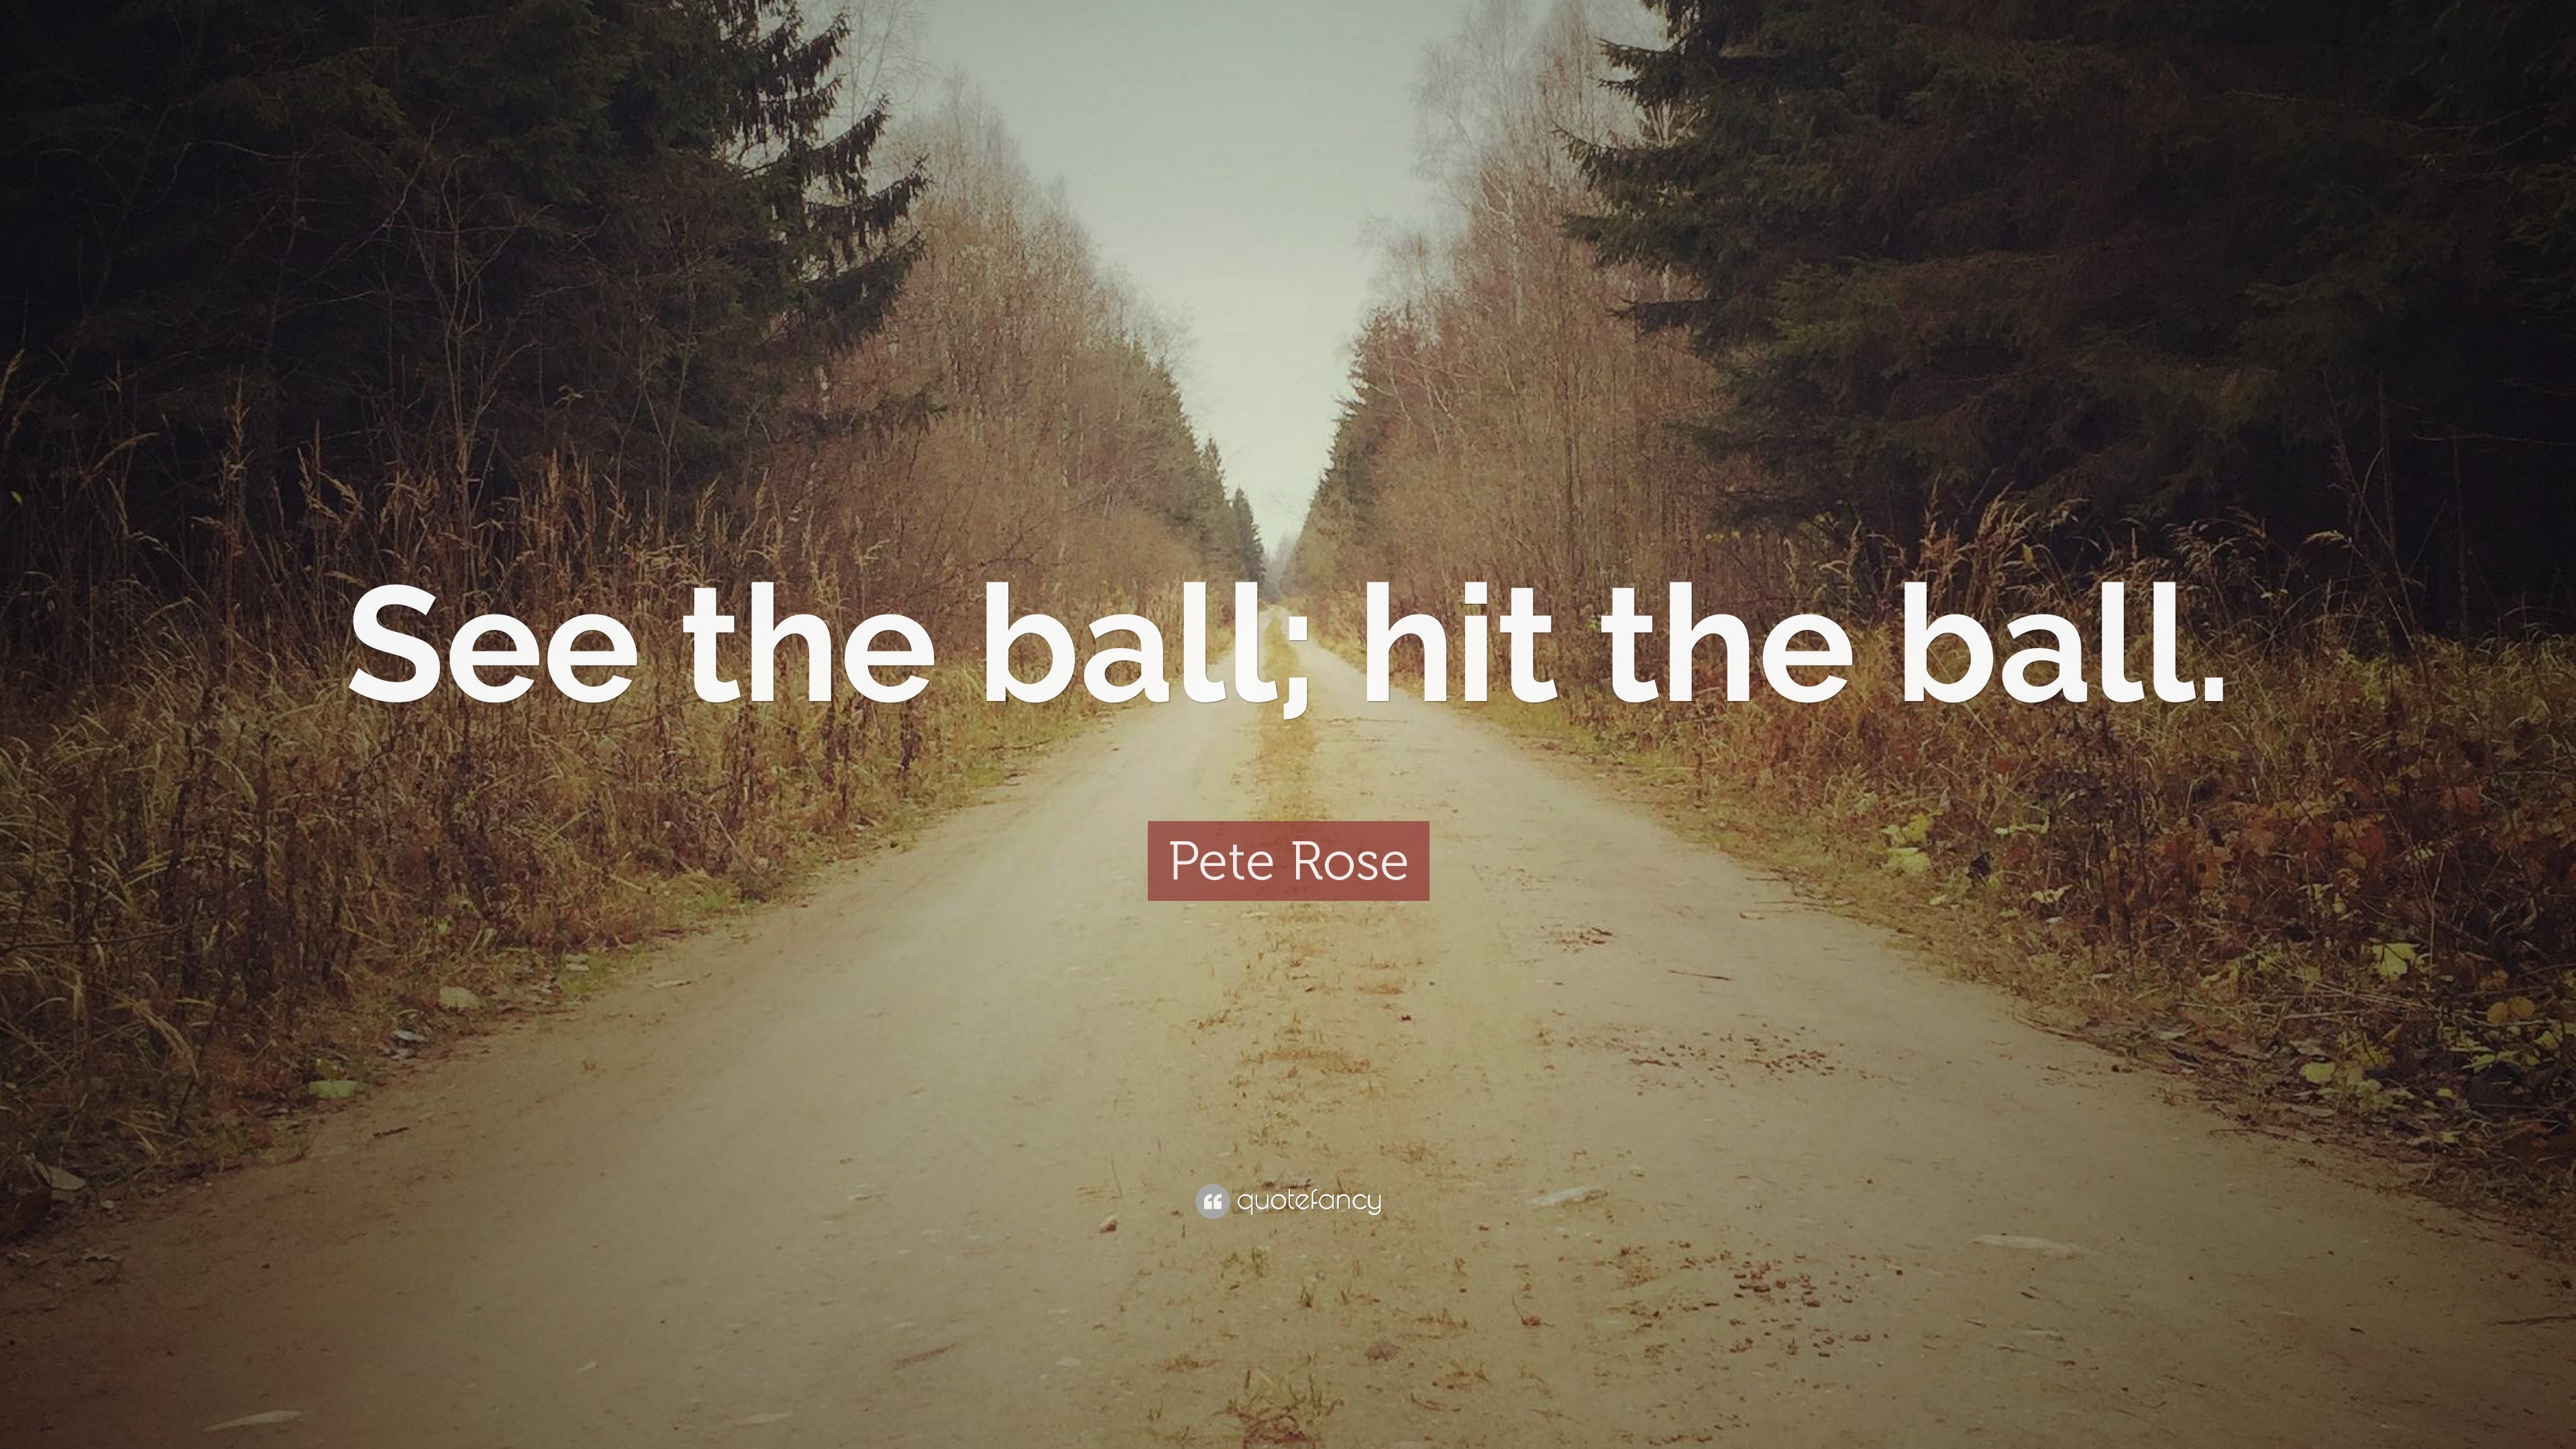 Pete Rose Quote: “See the ball; hit the ball.”